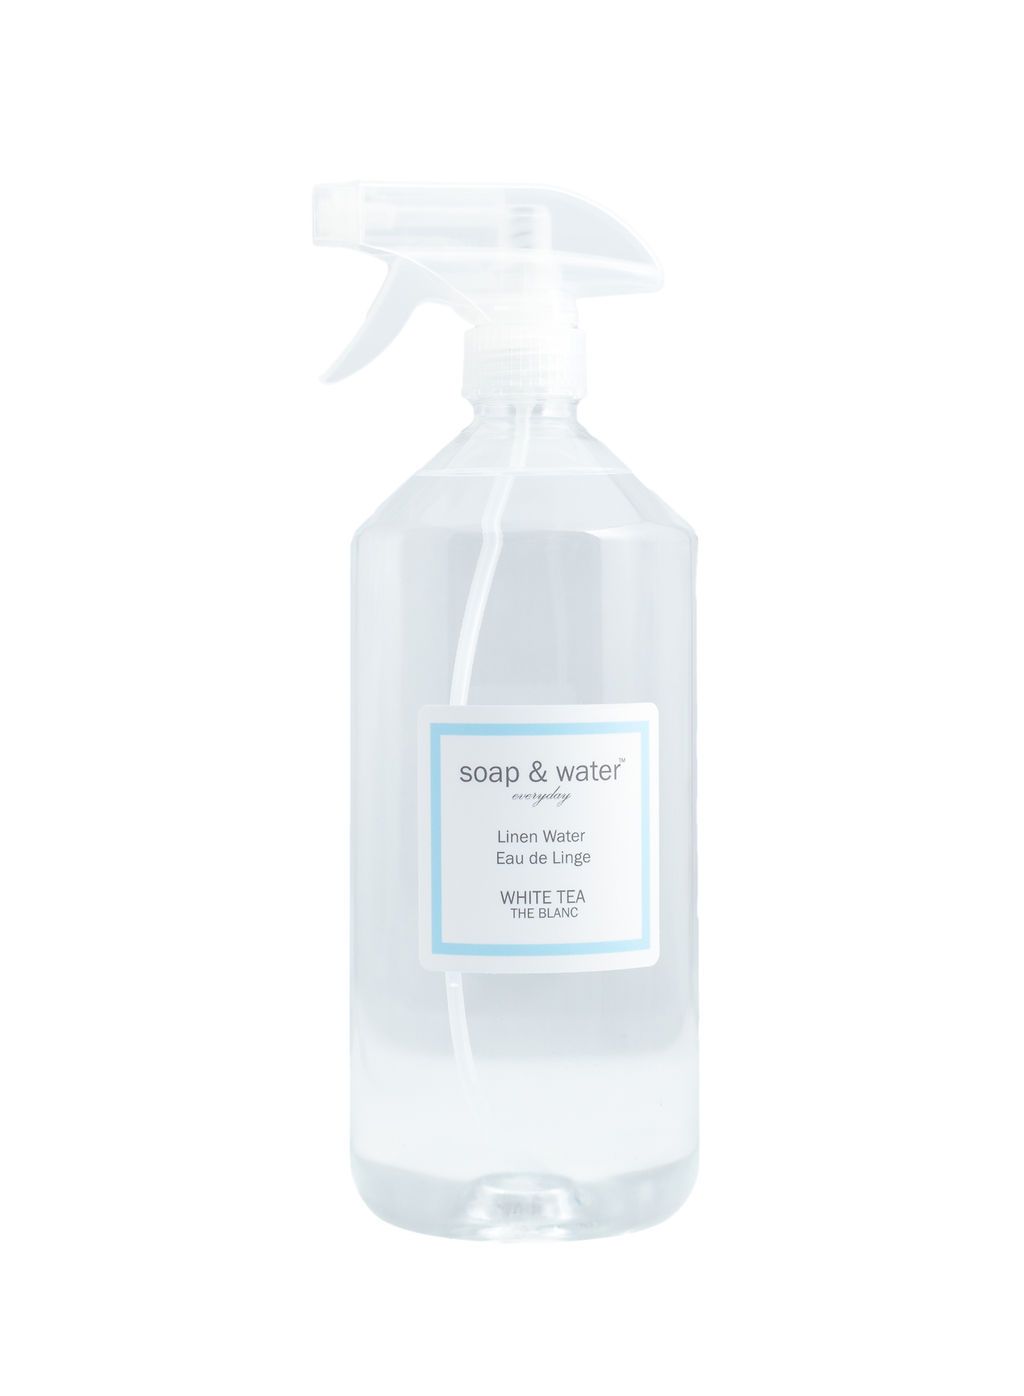 Soap & Water White Tea Linen Water - 1L - Soap & Water Everyday